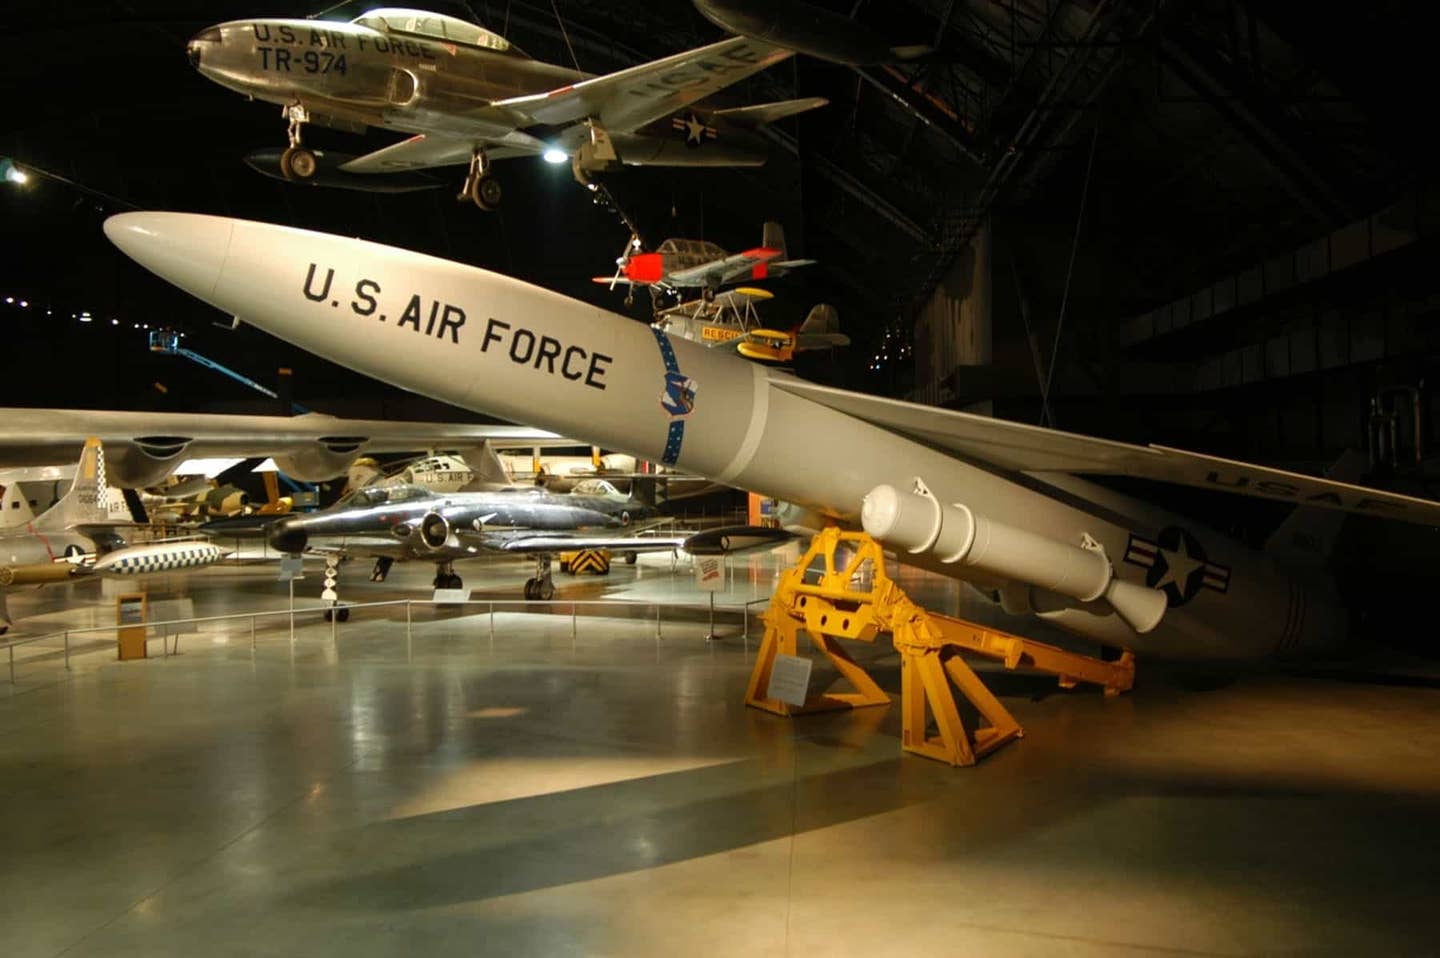 SM-62 Snark missile on display in the Cold War Gallery at the National Museum of the U.S. Air Force. (U.S. Air Force photo)